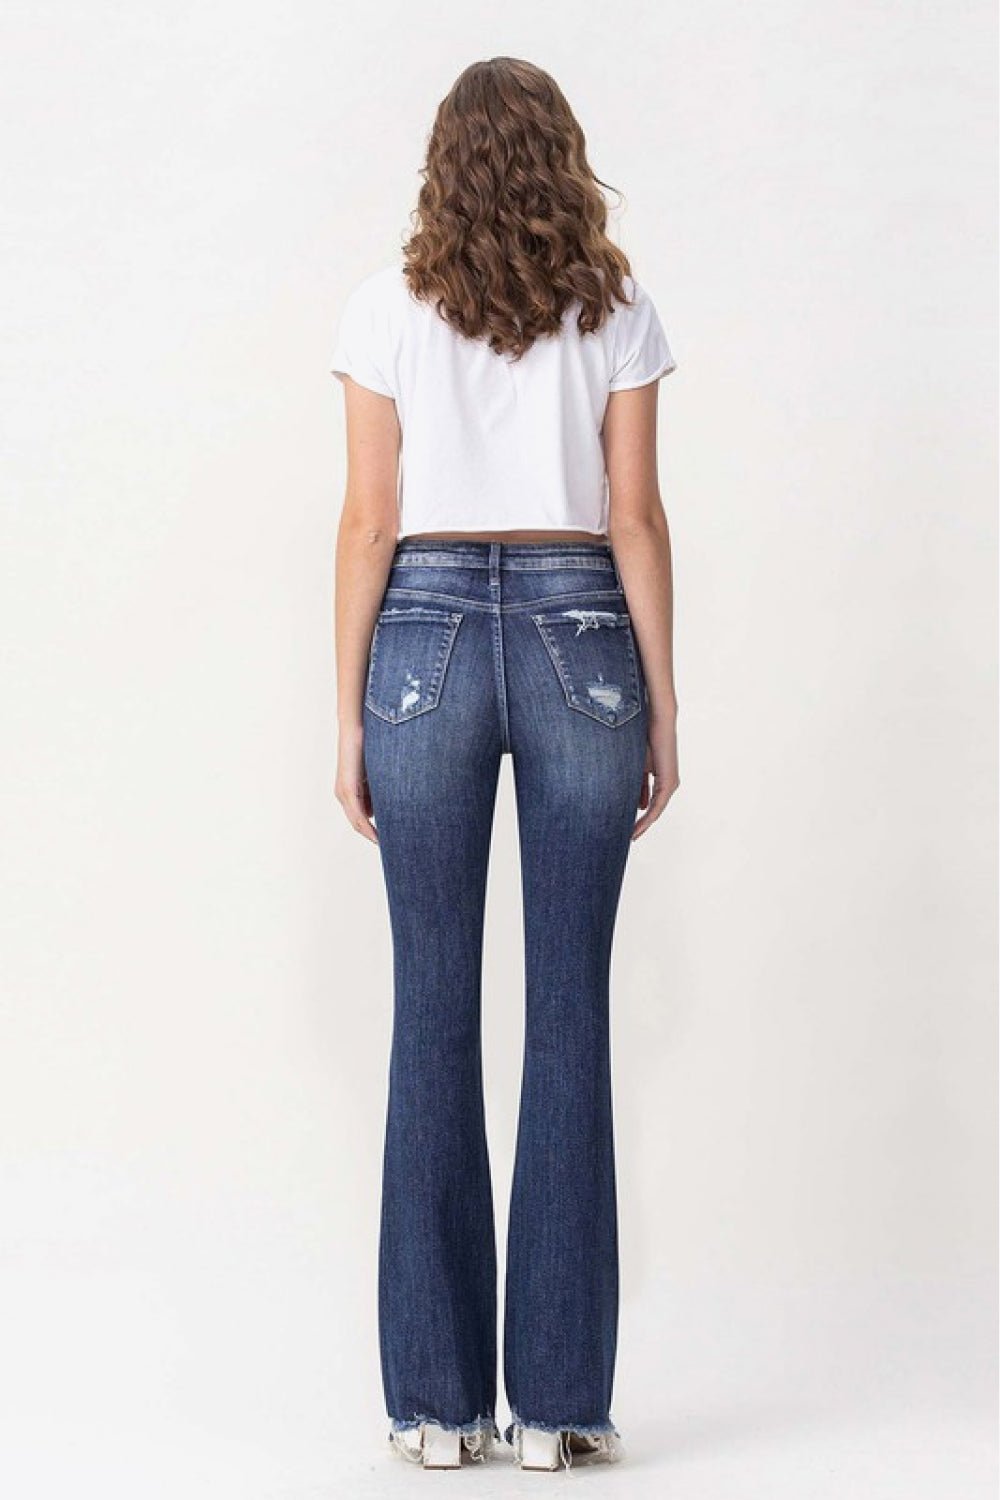 Luna Full Size High Rise Flare Jeans - Embrace your curves with confidence and style - Elevate your look to new heights. - Guy Christopher